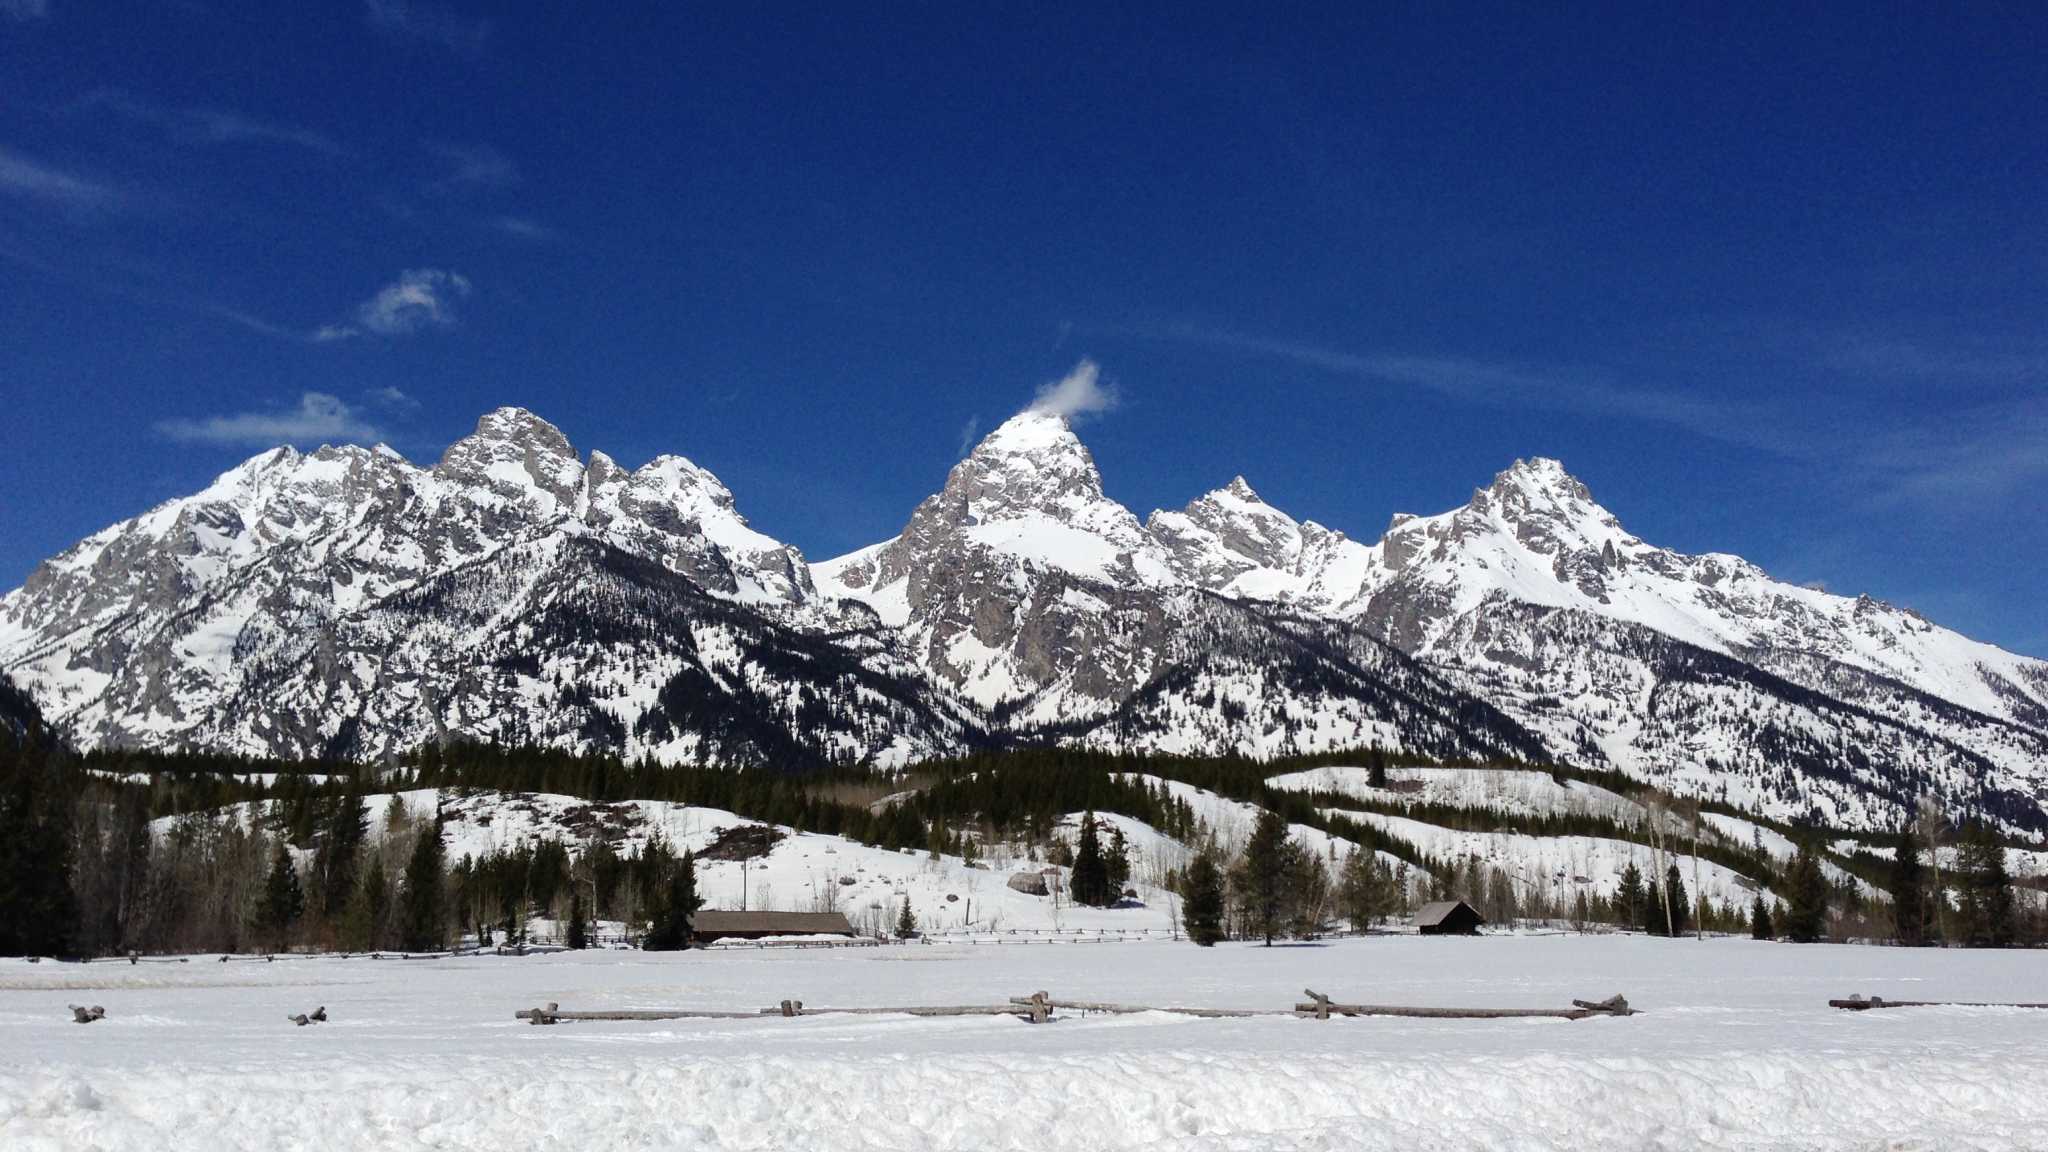 Winter in the Tetons